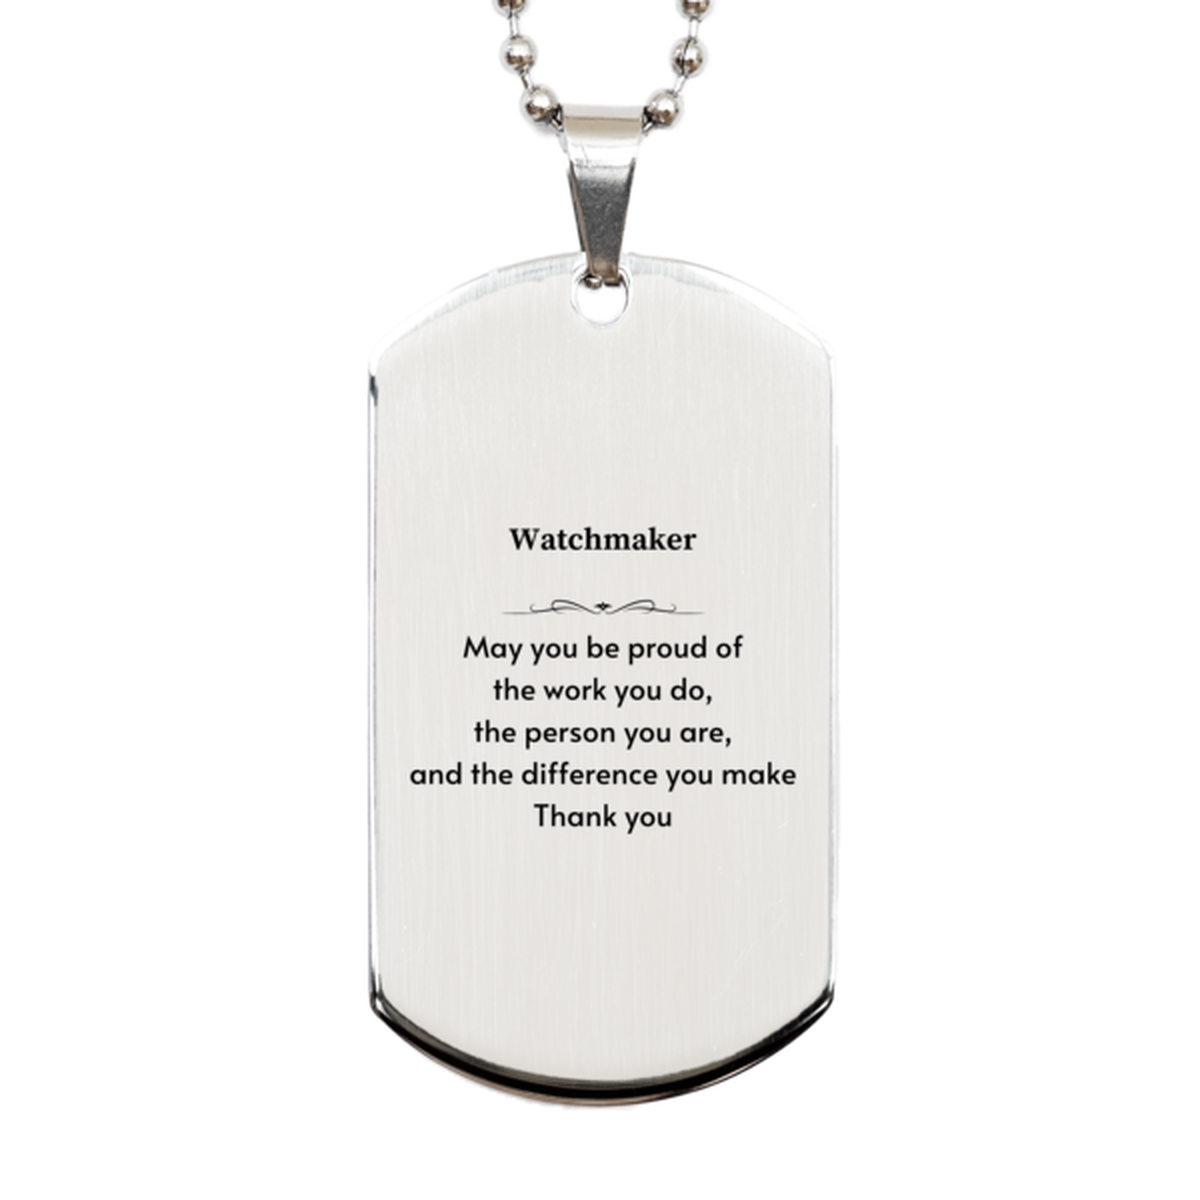 Heartwarming Silver Dog Tag Retirement Coworkers Gifts for Watchmaker, Watchmaker May You be proud of the work you do, the person you are Gifts for Boss Men Women Friends